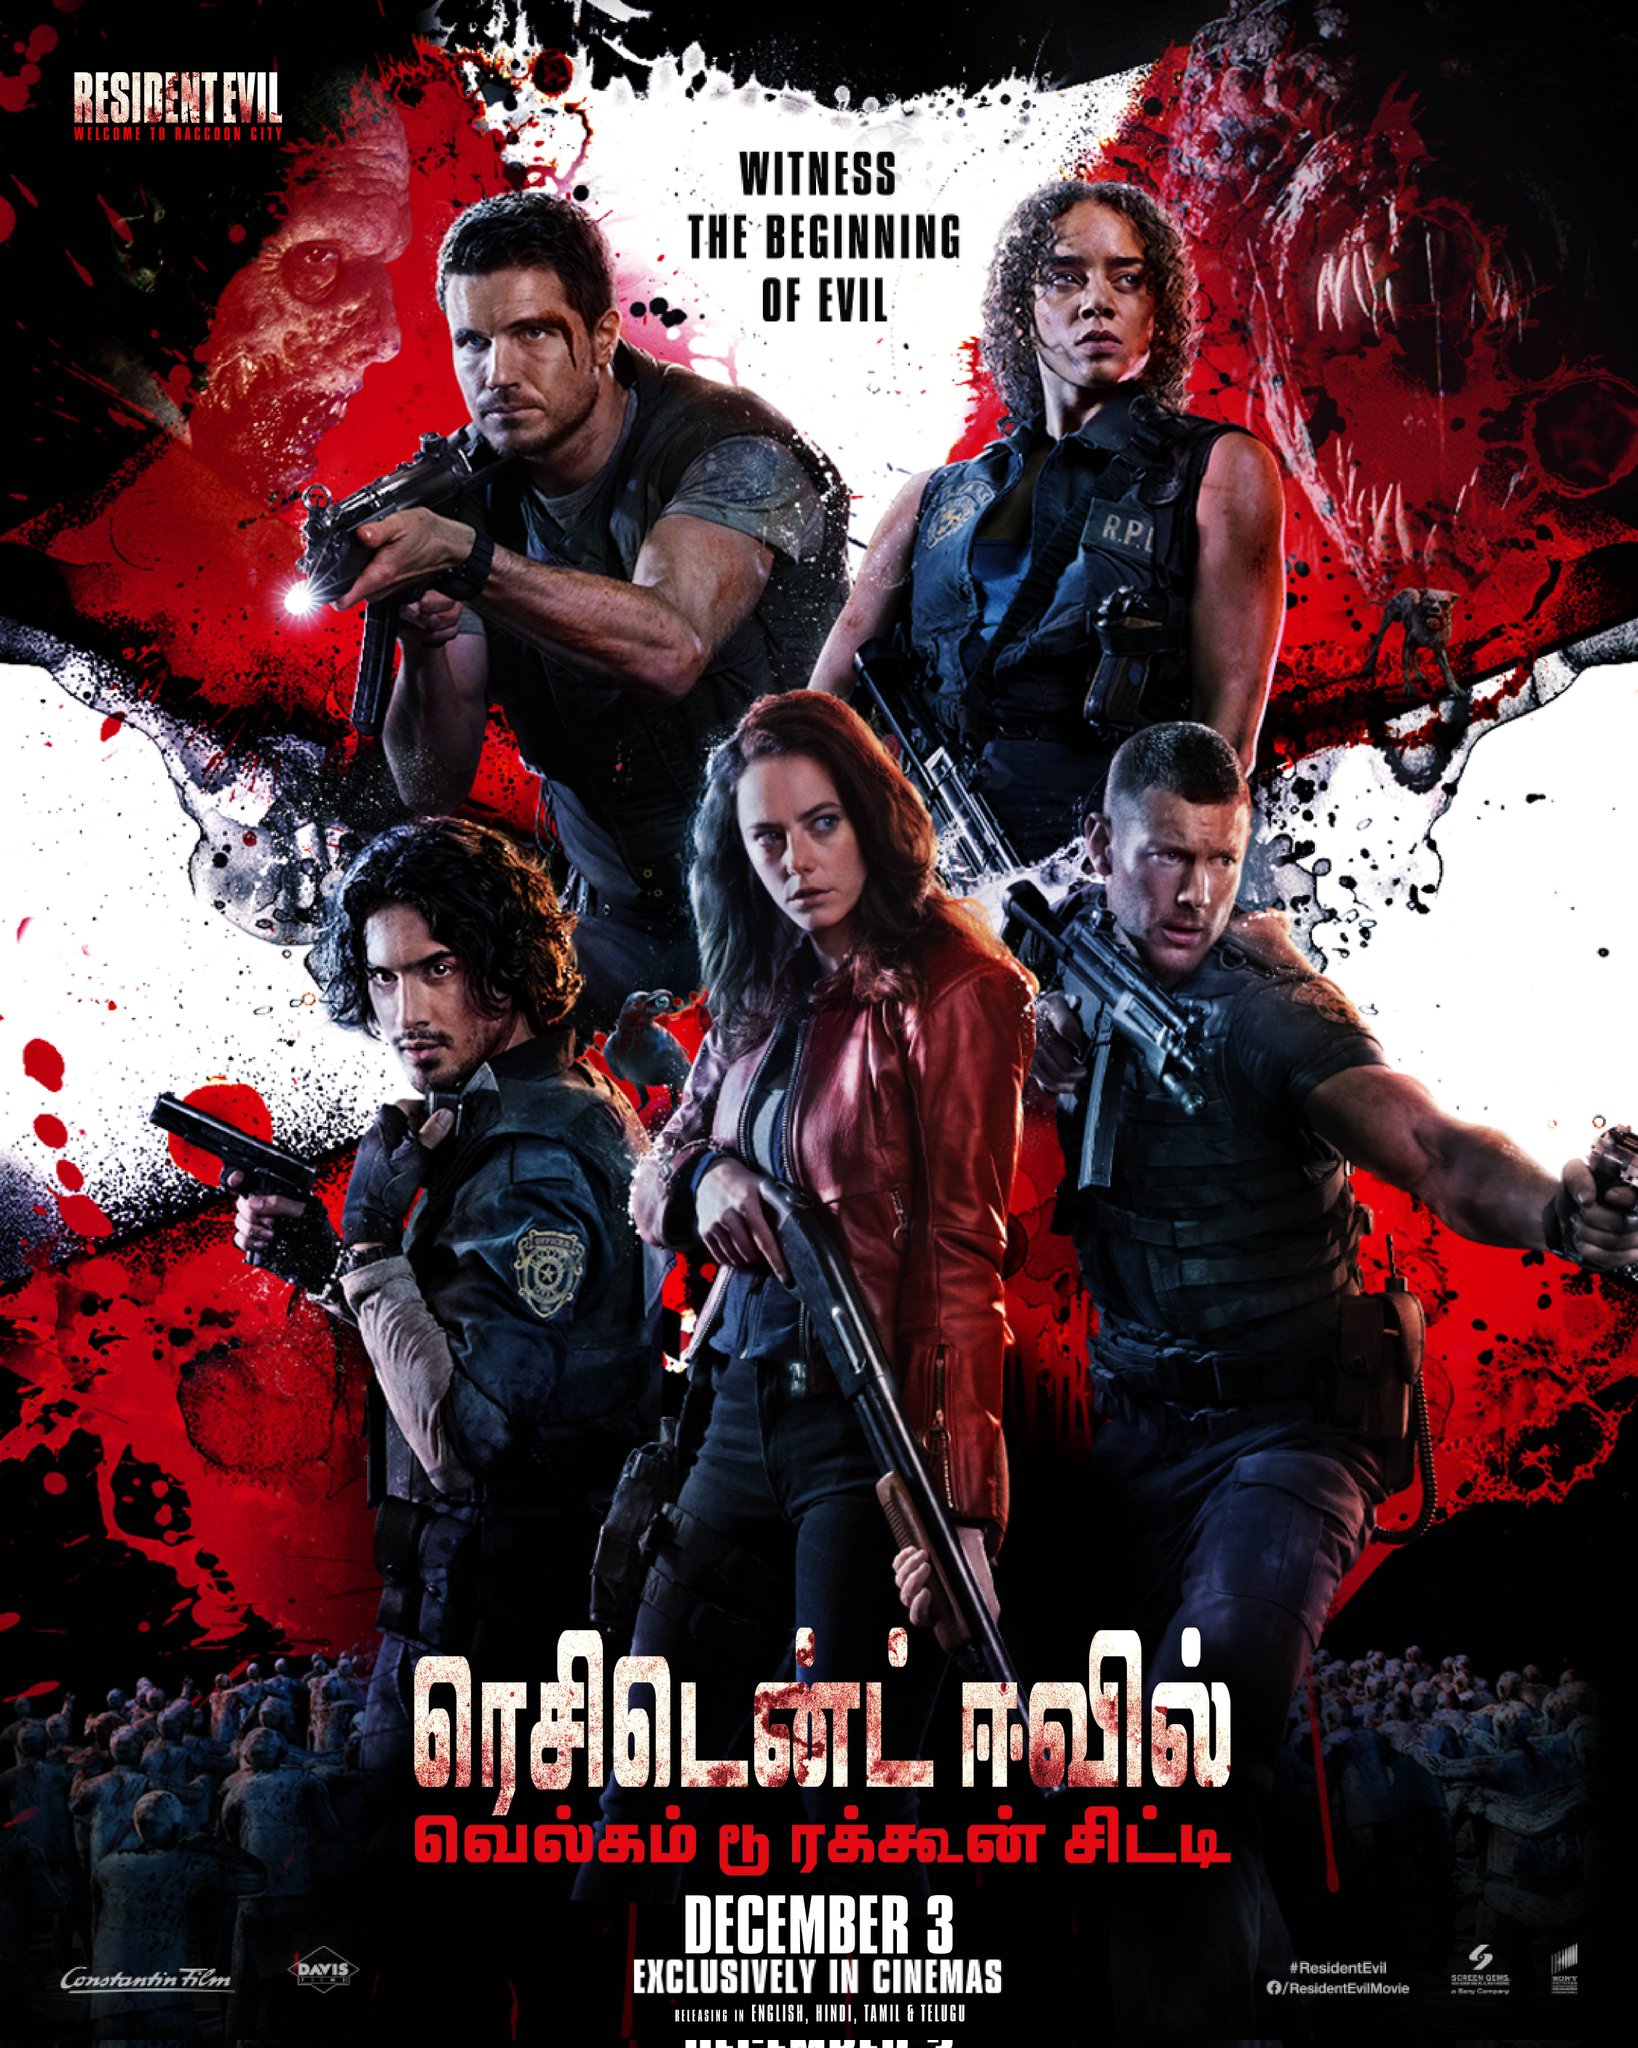 Resident Evil: Welcome to Raccoon City (2021) HDRip tamil Full Movie Watch Online Free MovieRulz